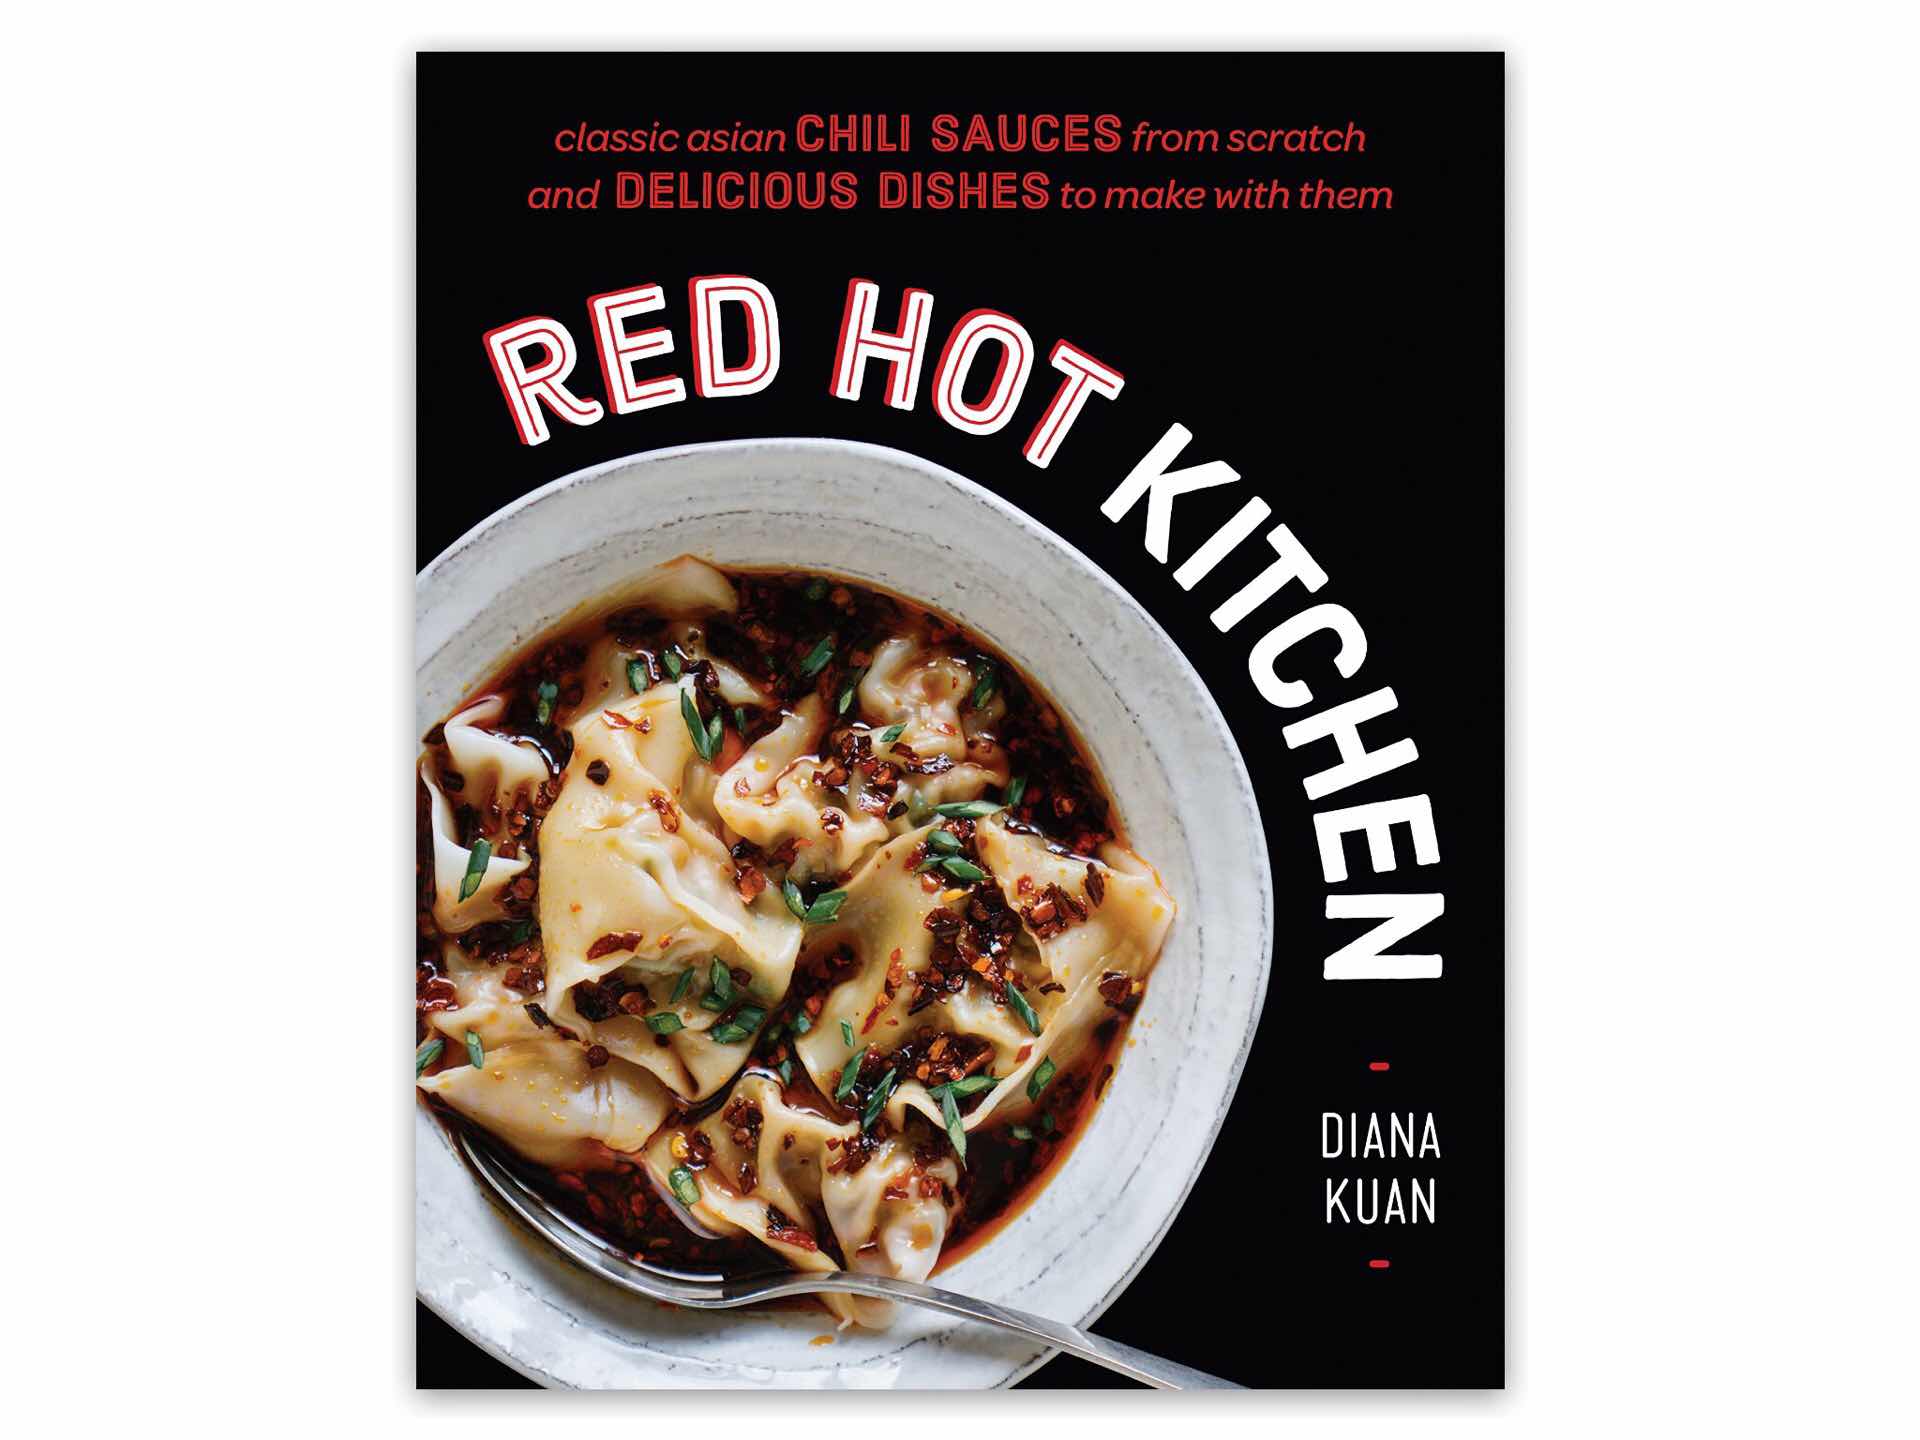 Red Hot Kitchen by Diana Kuan. ($14 hardcover)